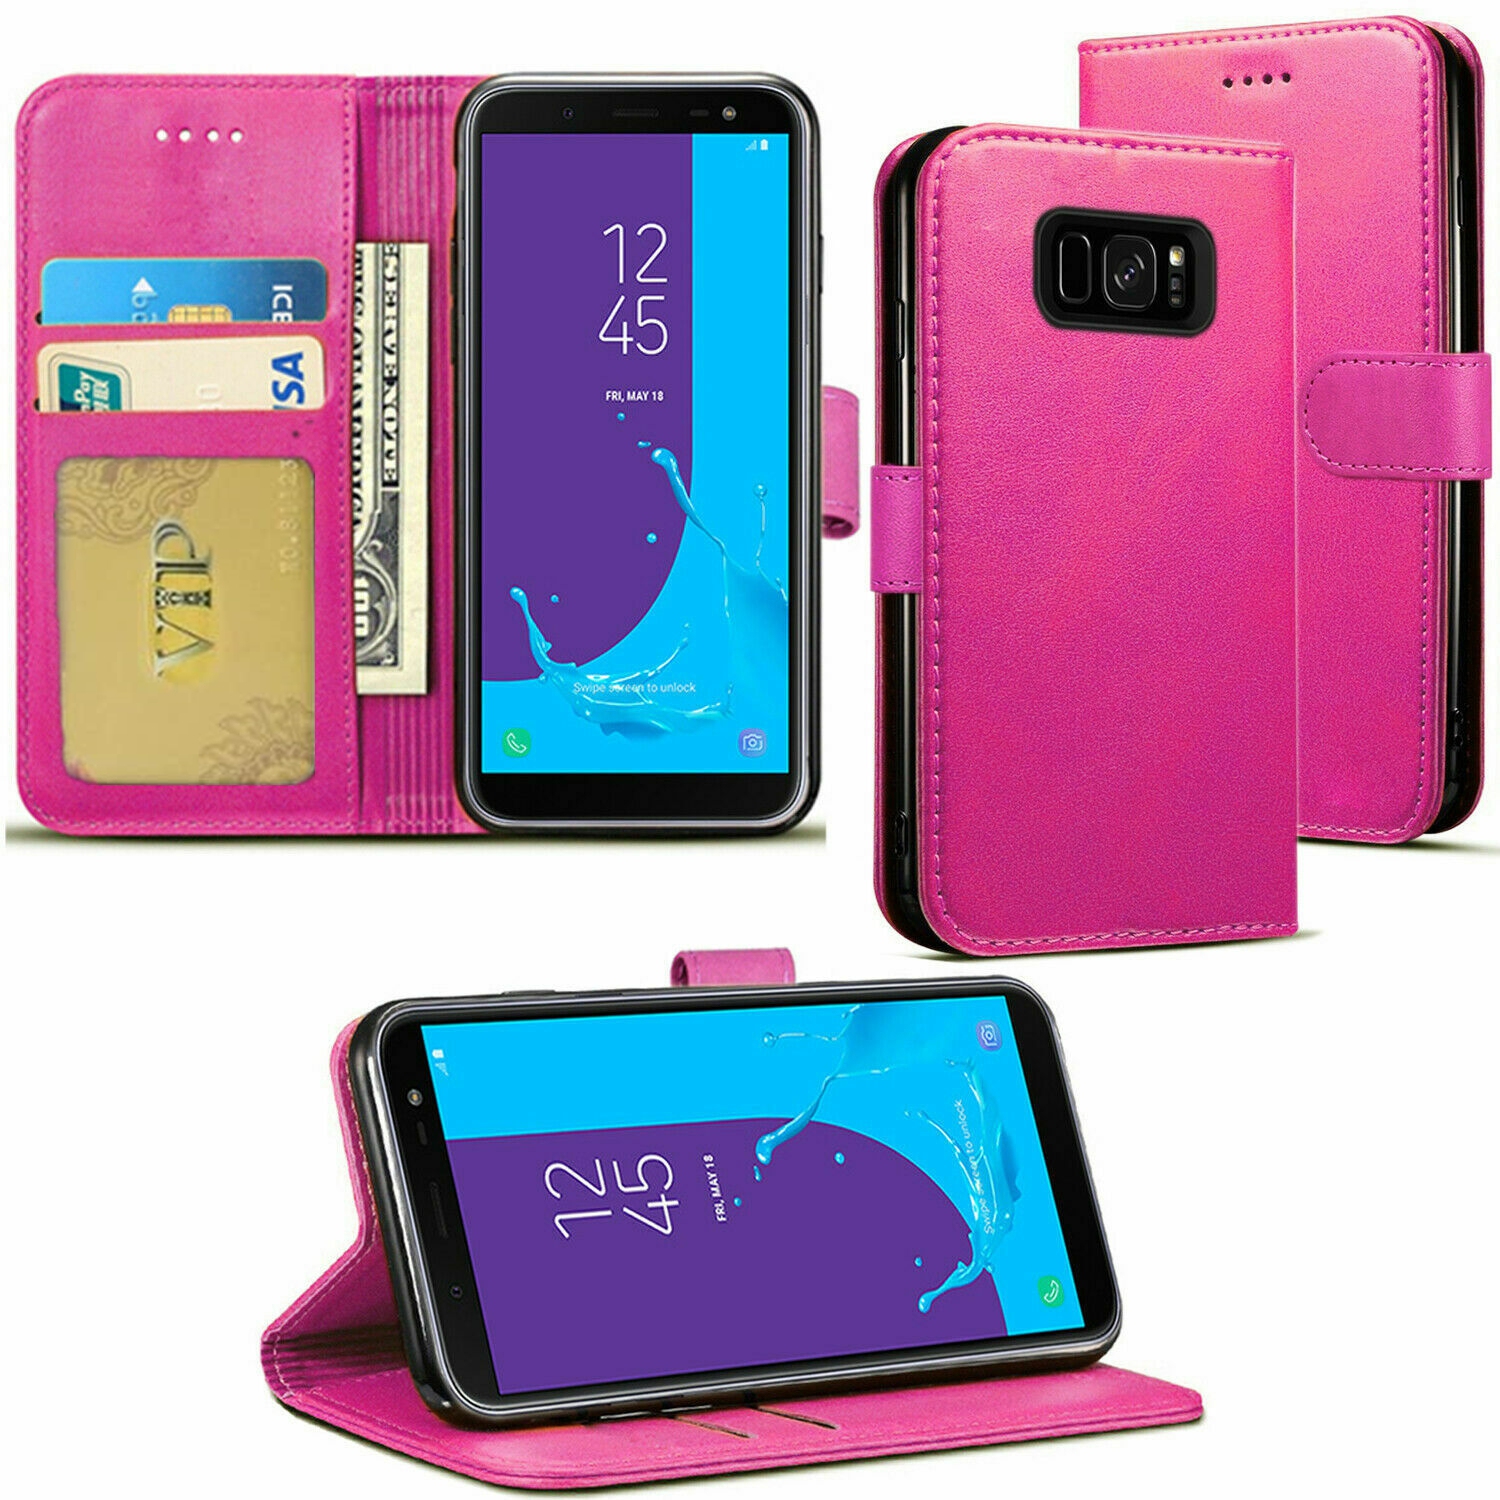 【CSmart】 Magnetic Card Slot Leather Folio Wallet Flip Case Cover for Samsung Galaxy S6 Edge Plus, Hot Pink